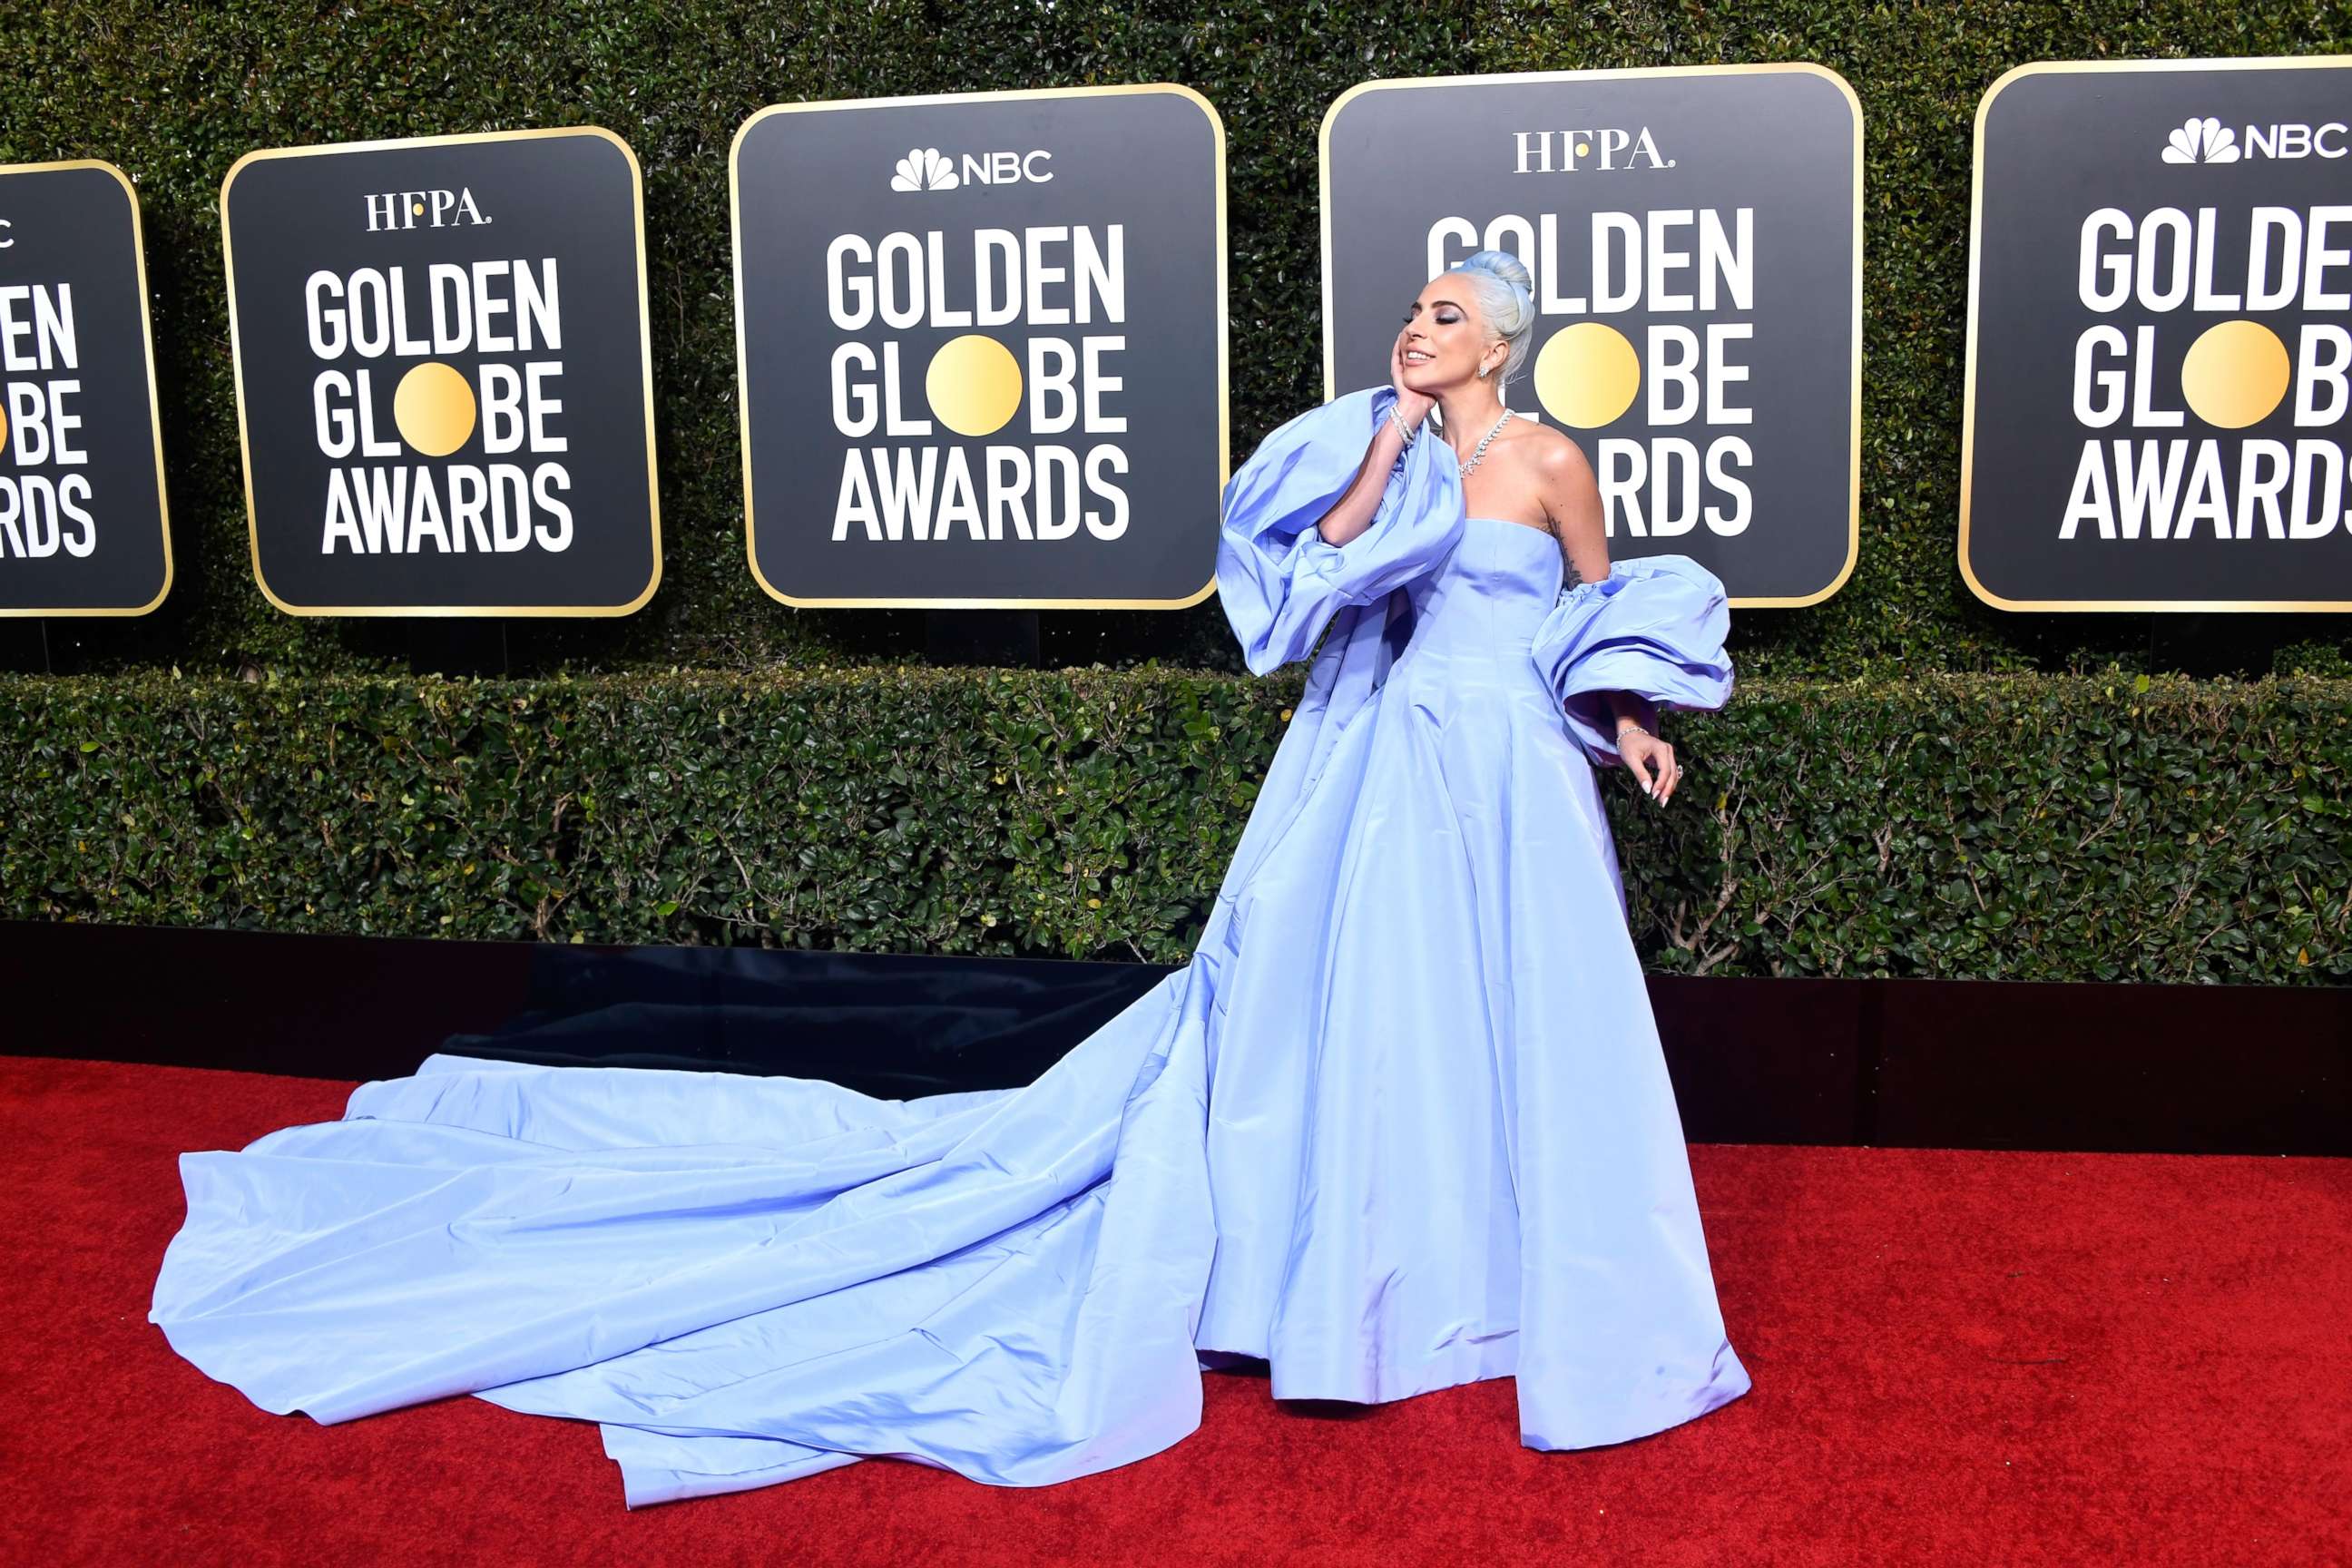 PHOTO: Lady Gaga attends the 76th annual Golden Globe awards at the Beverly Hilton Hotel, Jan. 6, 2019 in Beverly Hills, Calif.